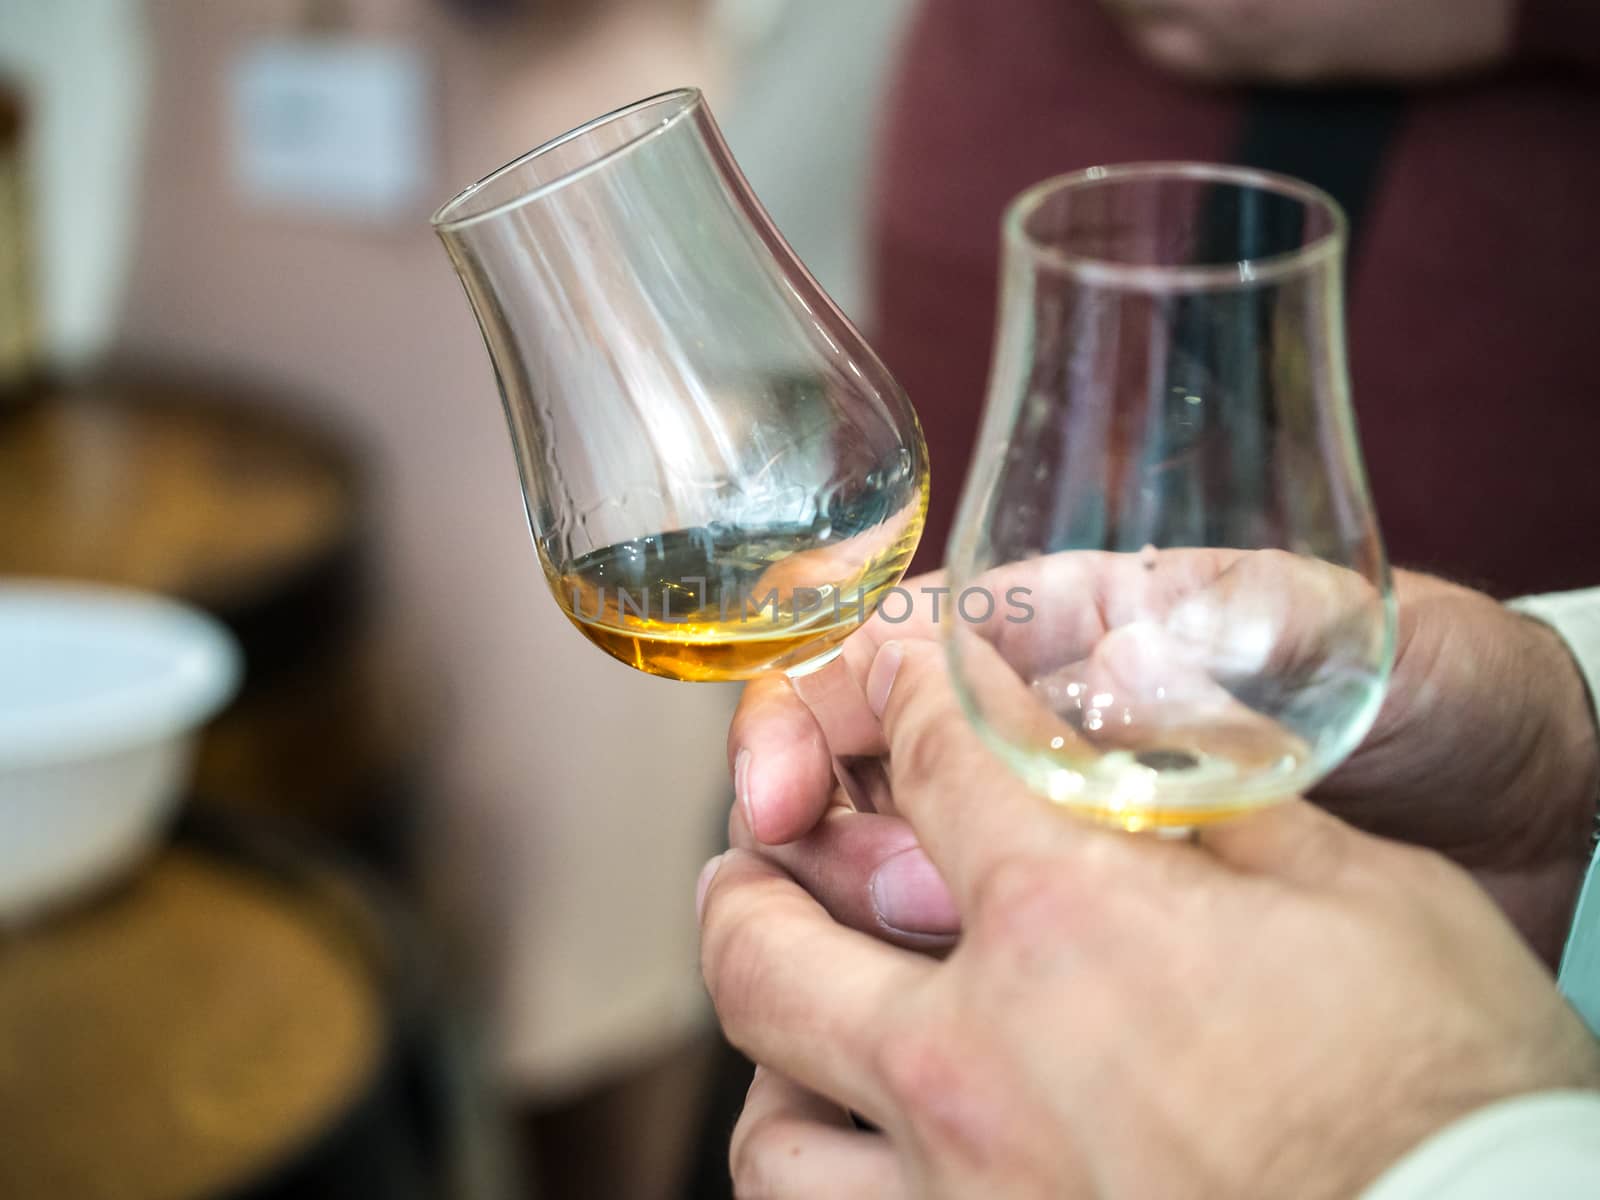 Hand holding a snifter glass filled with whisky, whisky tasting event